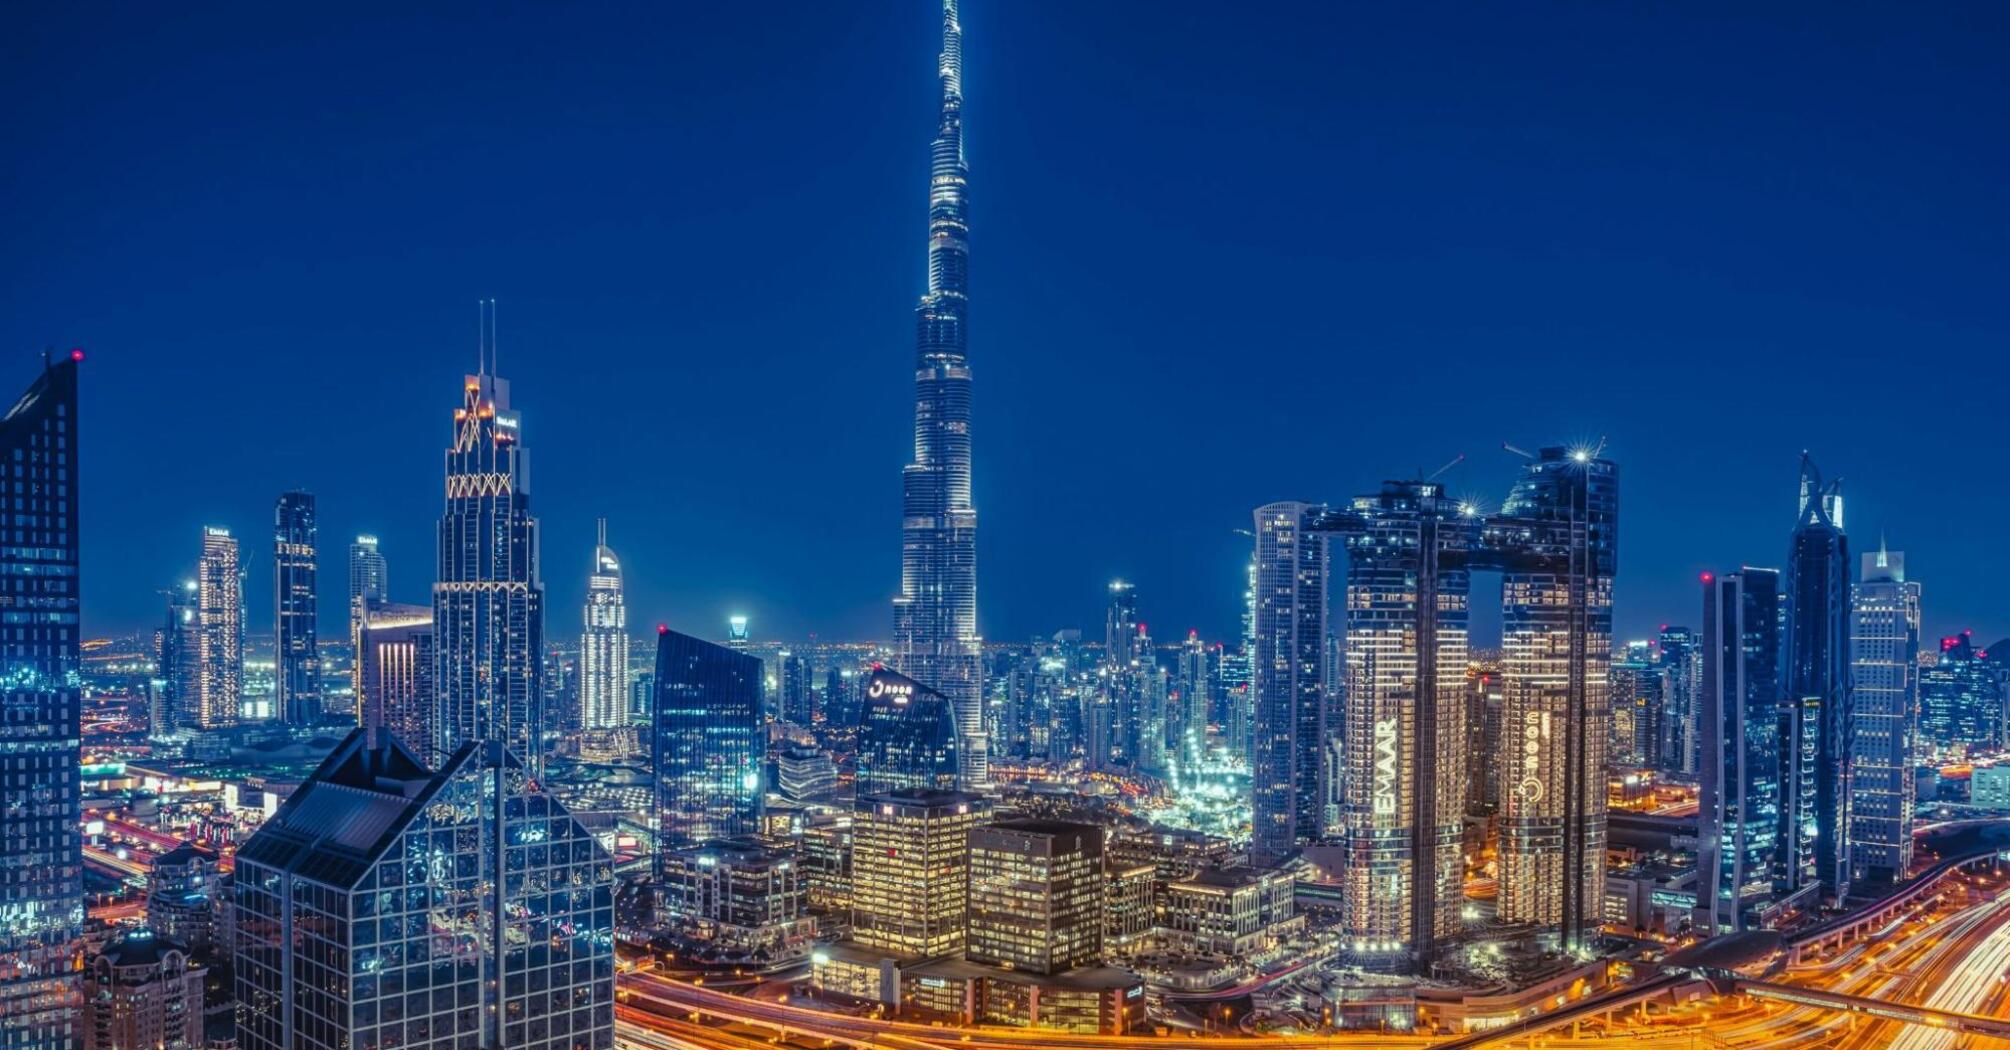 Night city view of Dubai with the heist buildings of the world